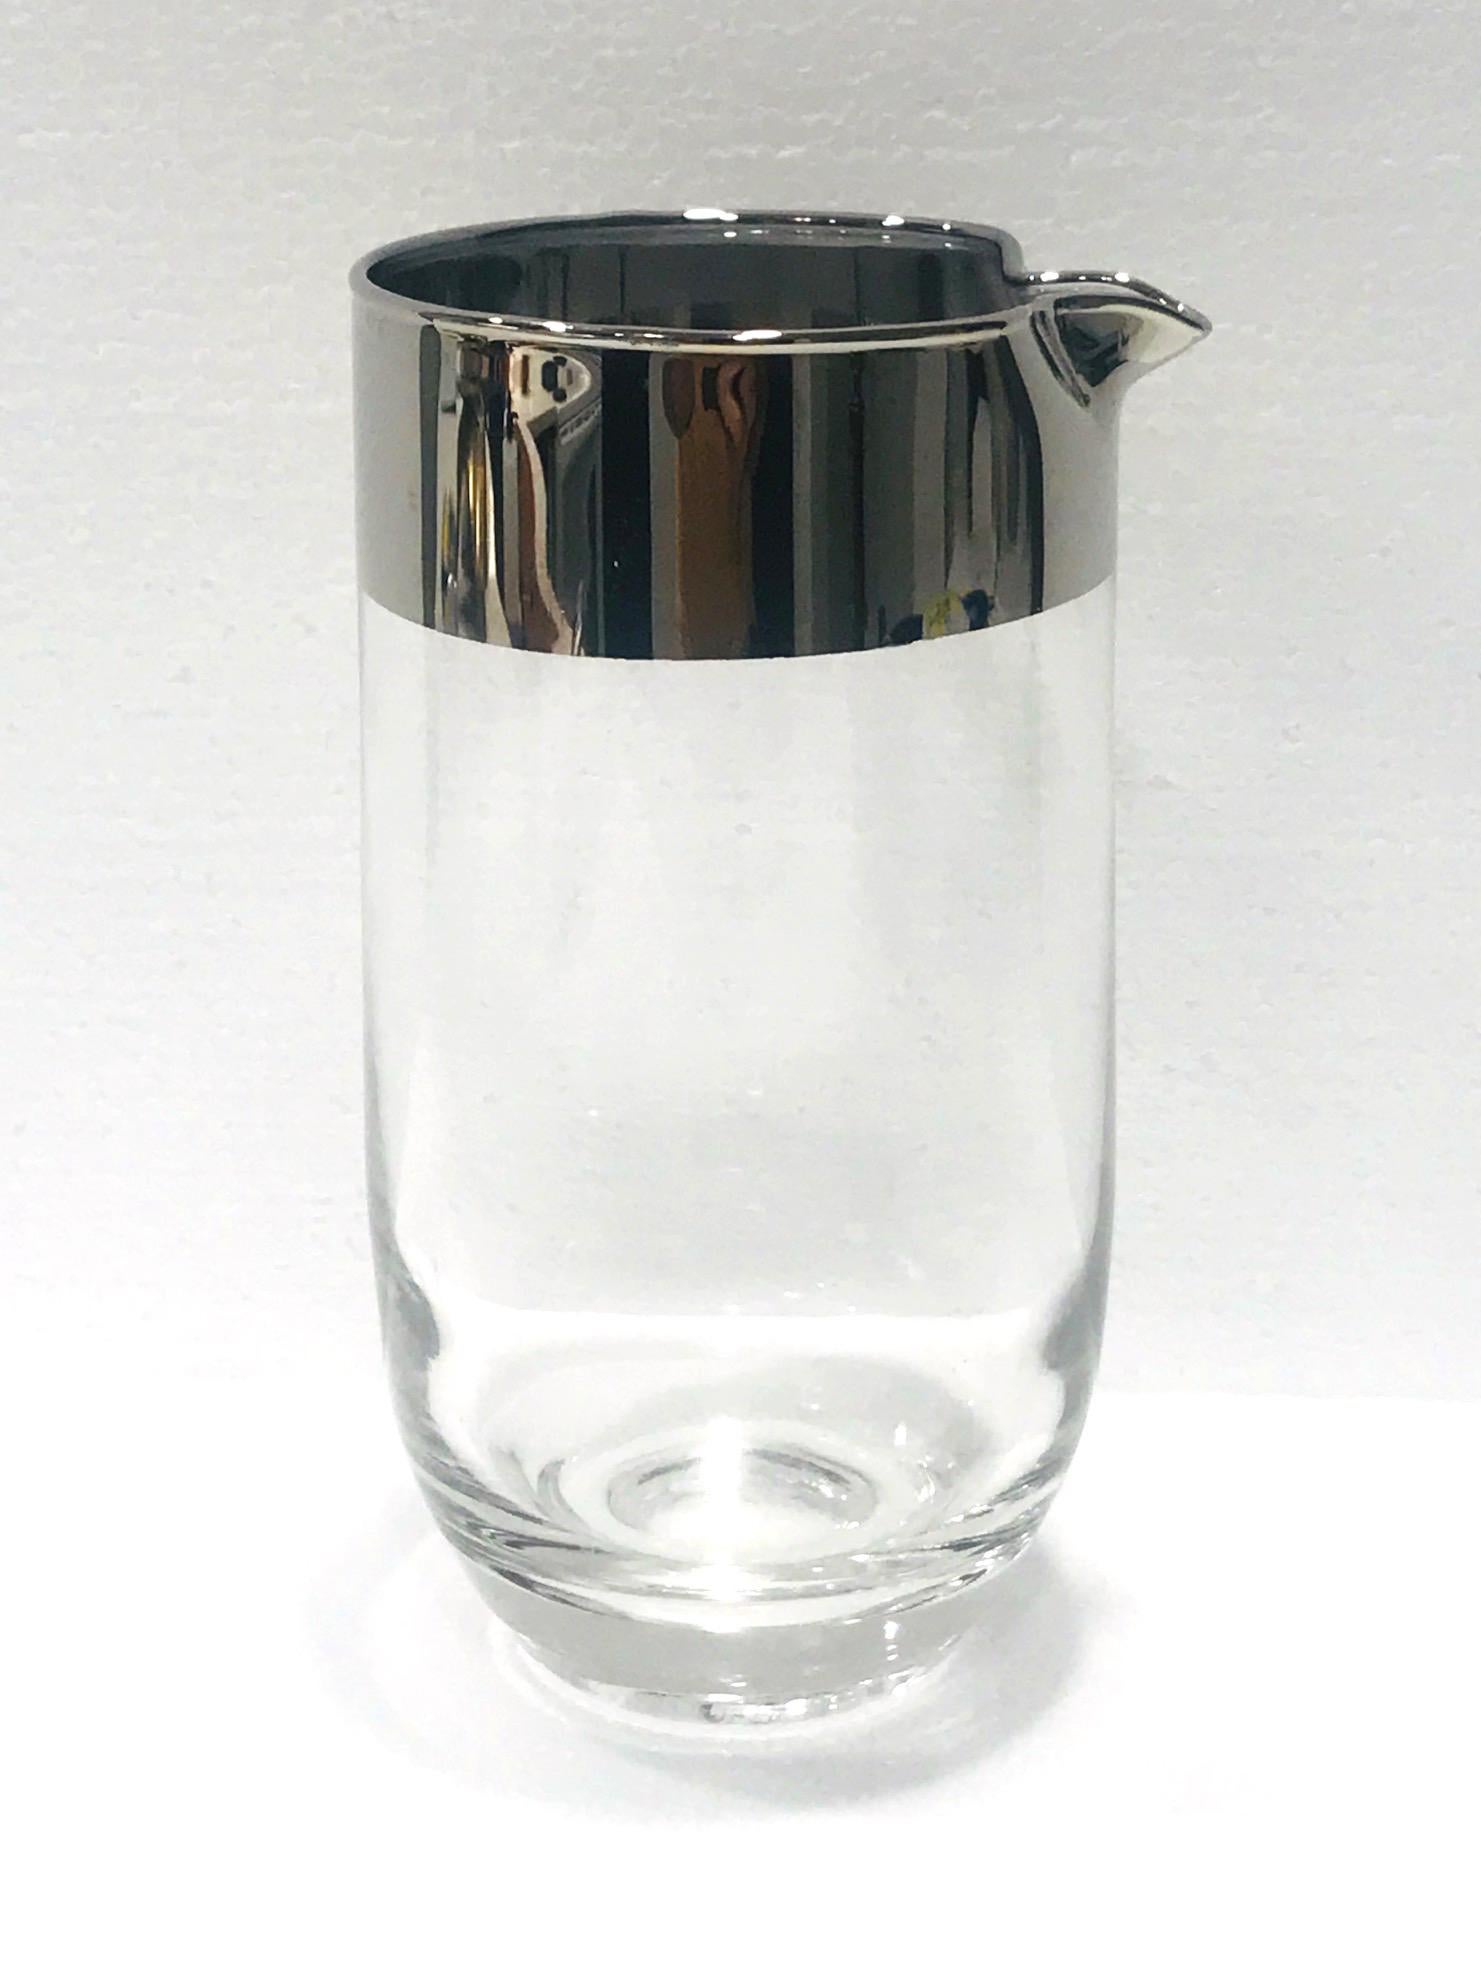 Vintage cocktail shaker or carafe by Dorothy Thorpe, known for her iconic Mid-Century Modern barware designs. The glass cocktail mixer has a minimalist design featuring a striking silver overlay rim and a tapered base.
The pitcher has a stylized